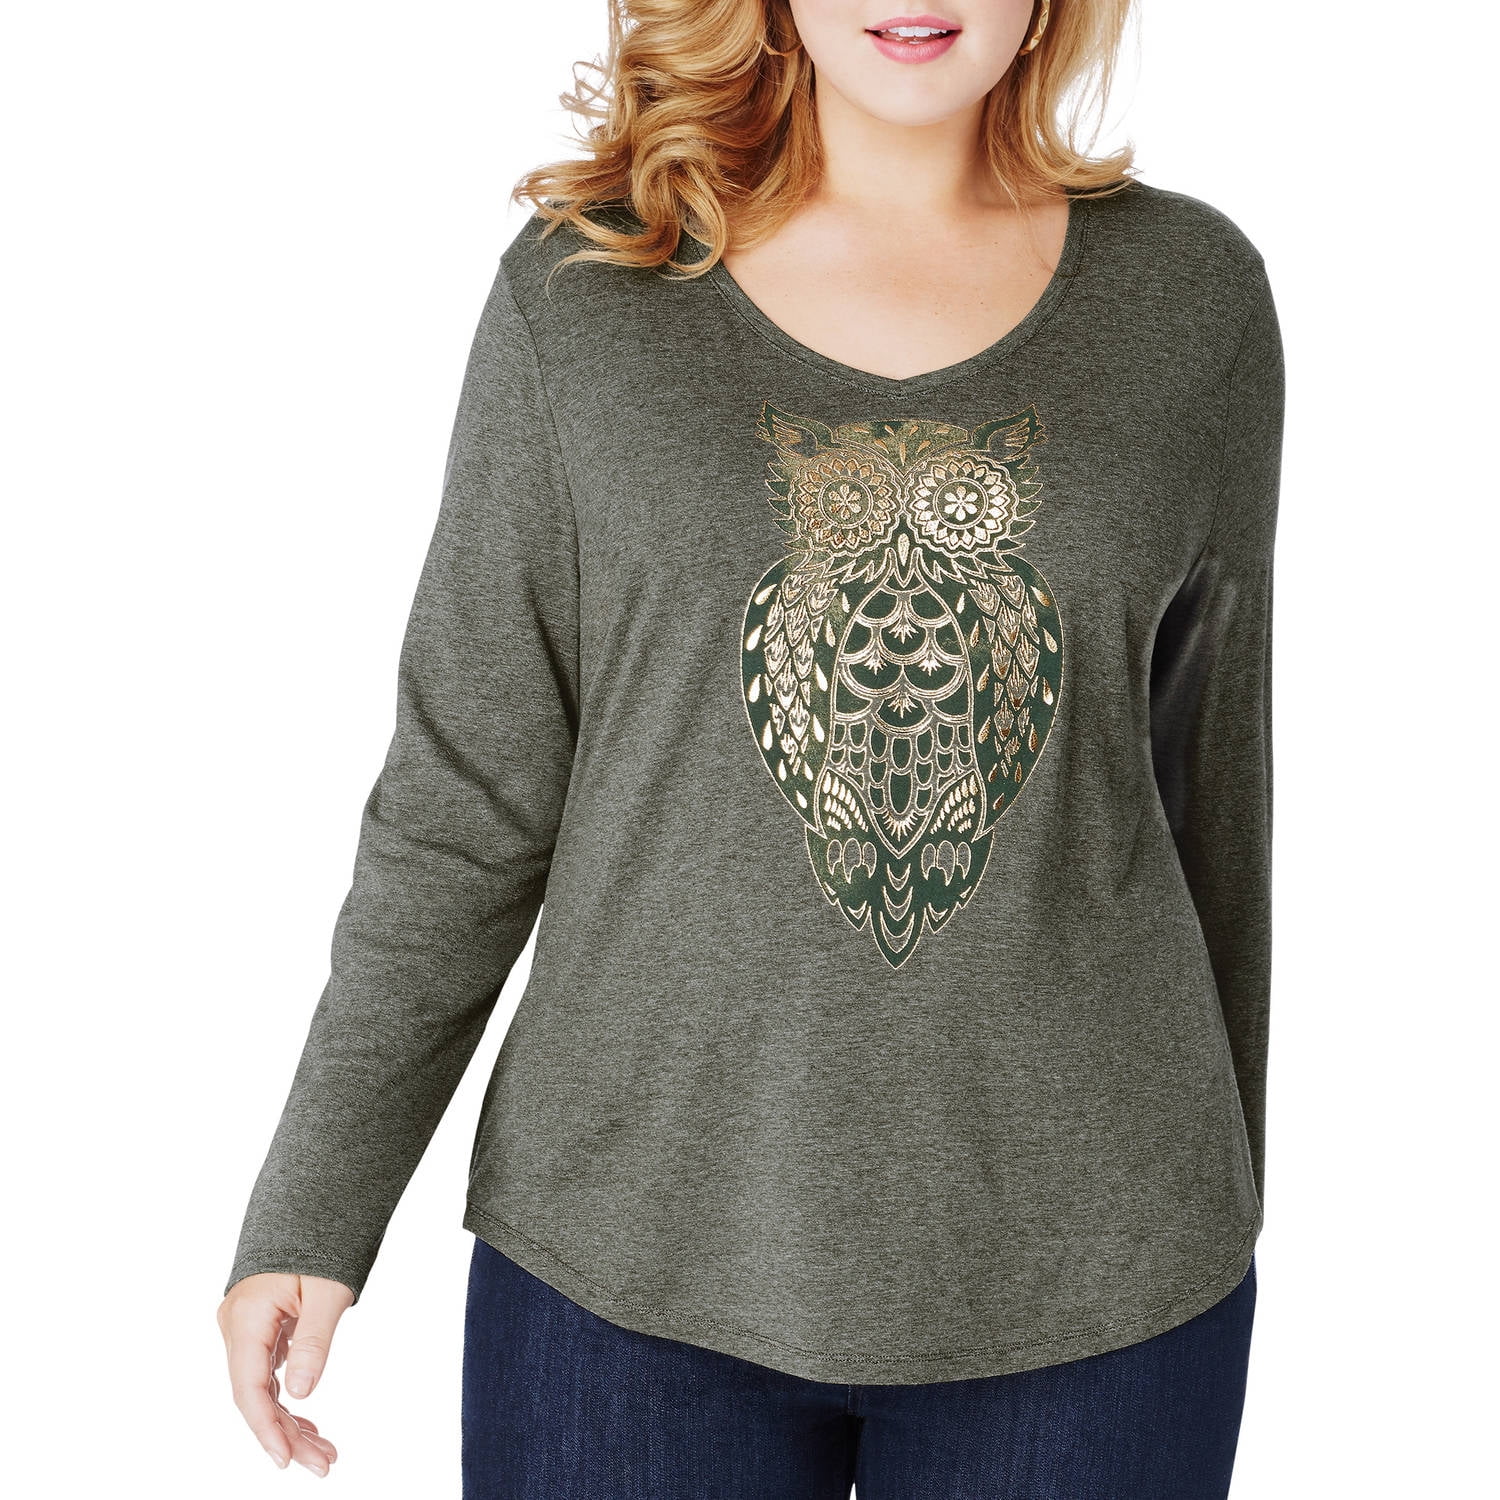 Plus Size Printed Long Tops For Women Full Sleeves T-shirts - Grey